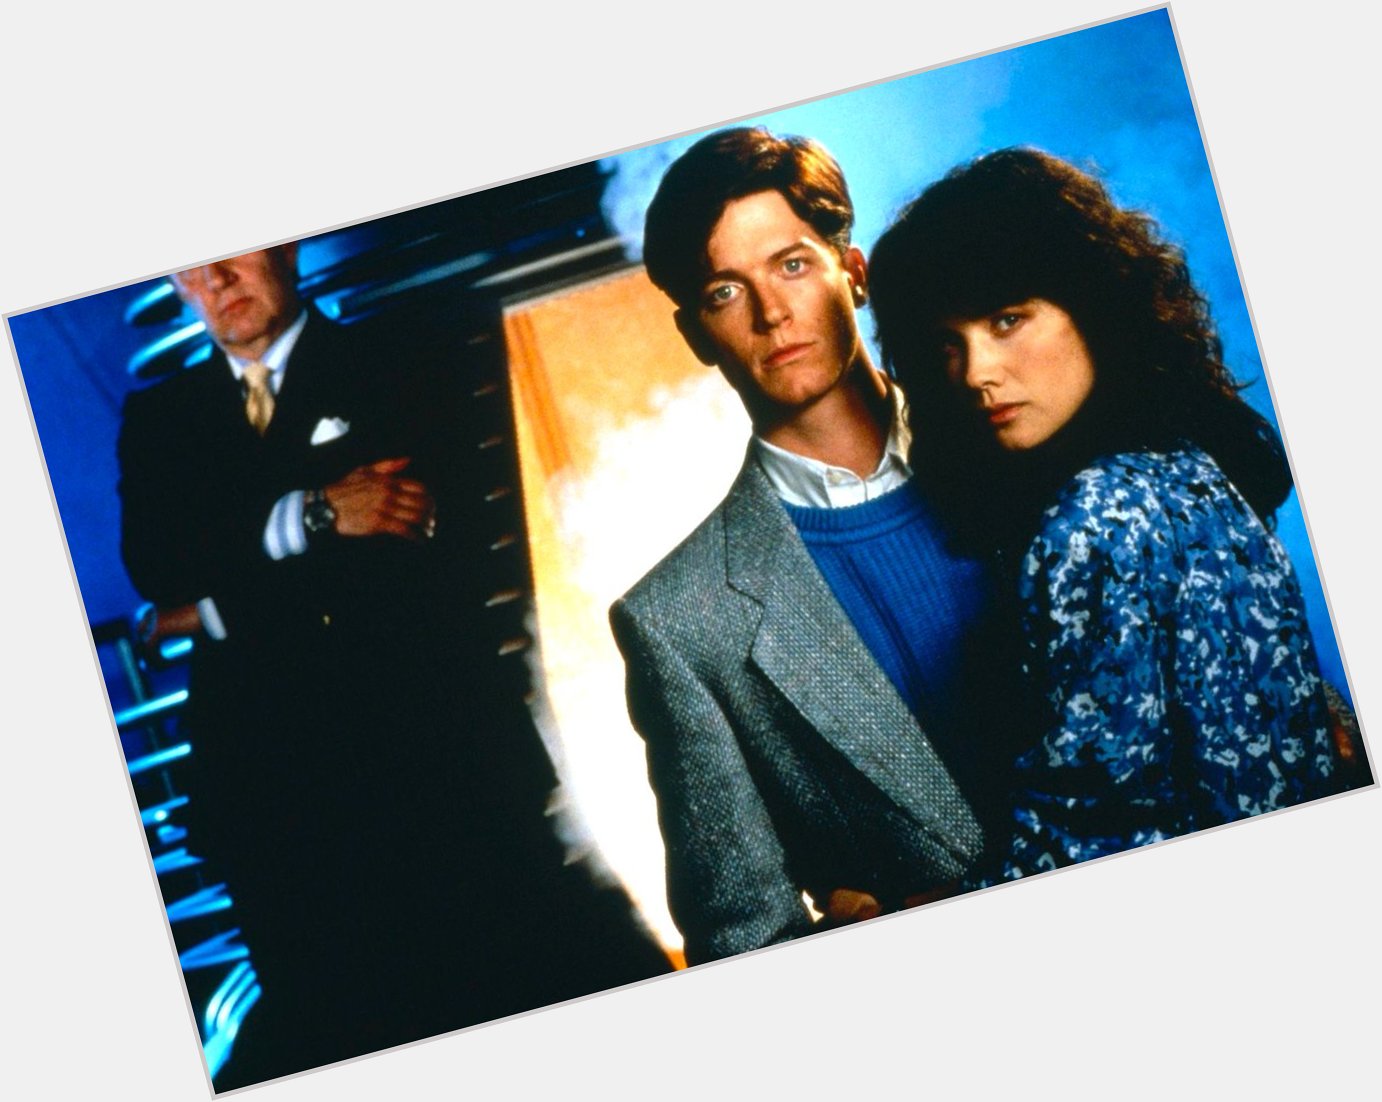 Hanging with her Fly Guy!

HL wishes a VERY Happy Birthday to Daphne Zuniga. (Martyn) 